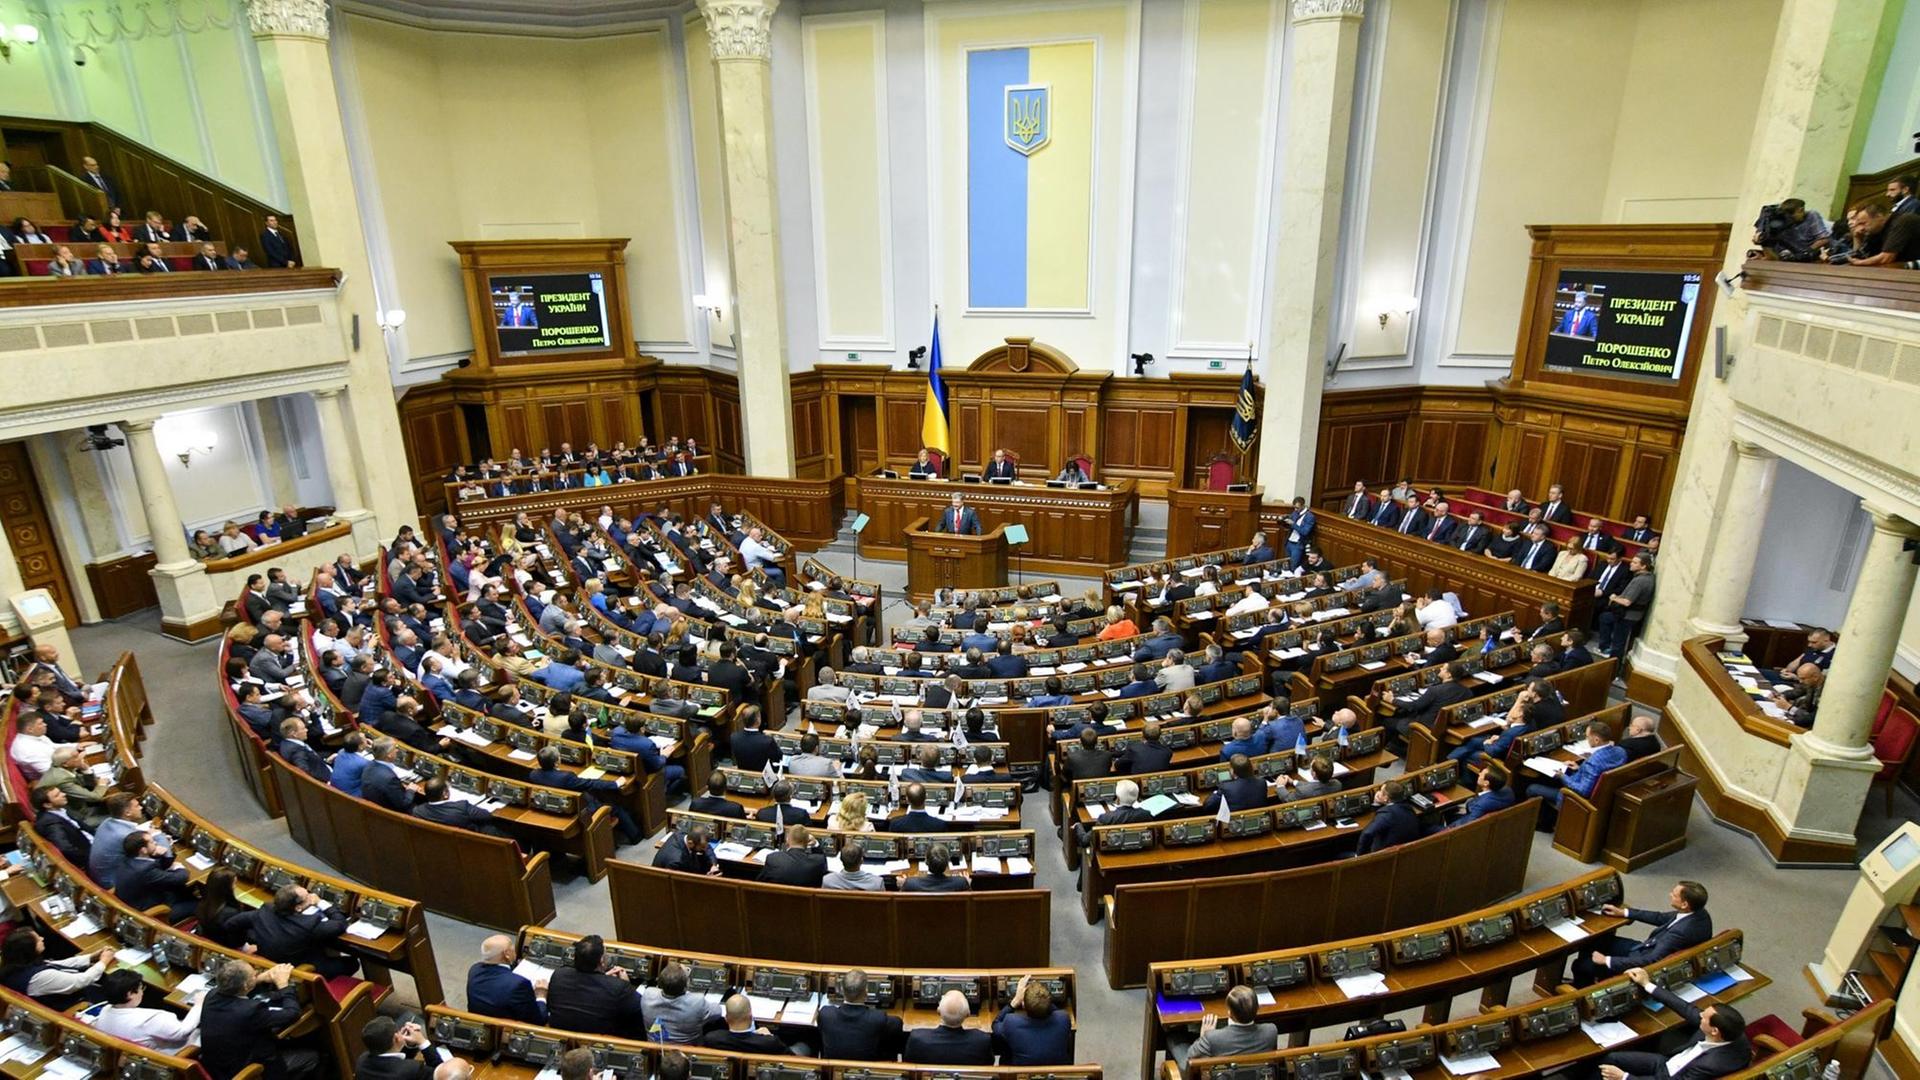 Ukrainian President Petro Poroshenko delivers a speech to Ukrainian lawmakers in the Ukrainian Parliament in Kiev on September 20, 2018. During his speech on the internal and external situation of Ukraine in 2018 Poroshenko raised the questions of NATO and European Union membership, Kremlin media influence ahead of future elections and the creation of the Autocephalous Orthodox Ukrainian Church.